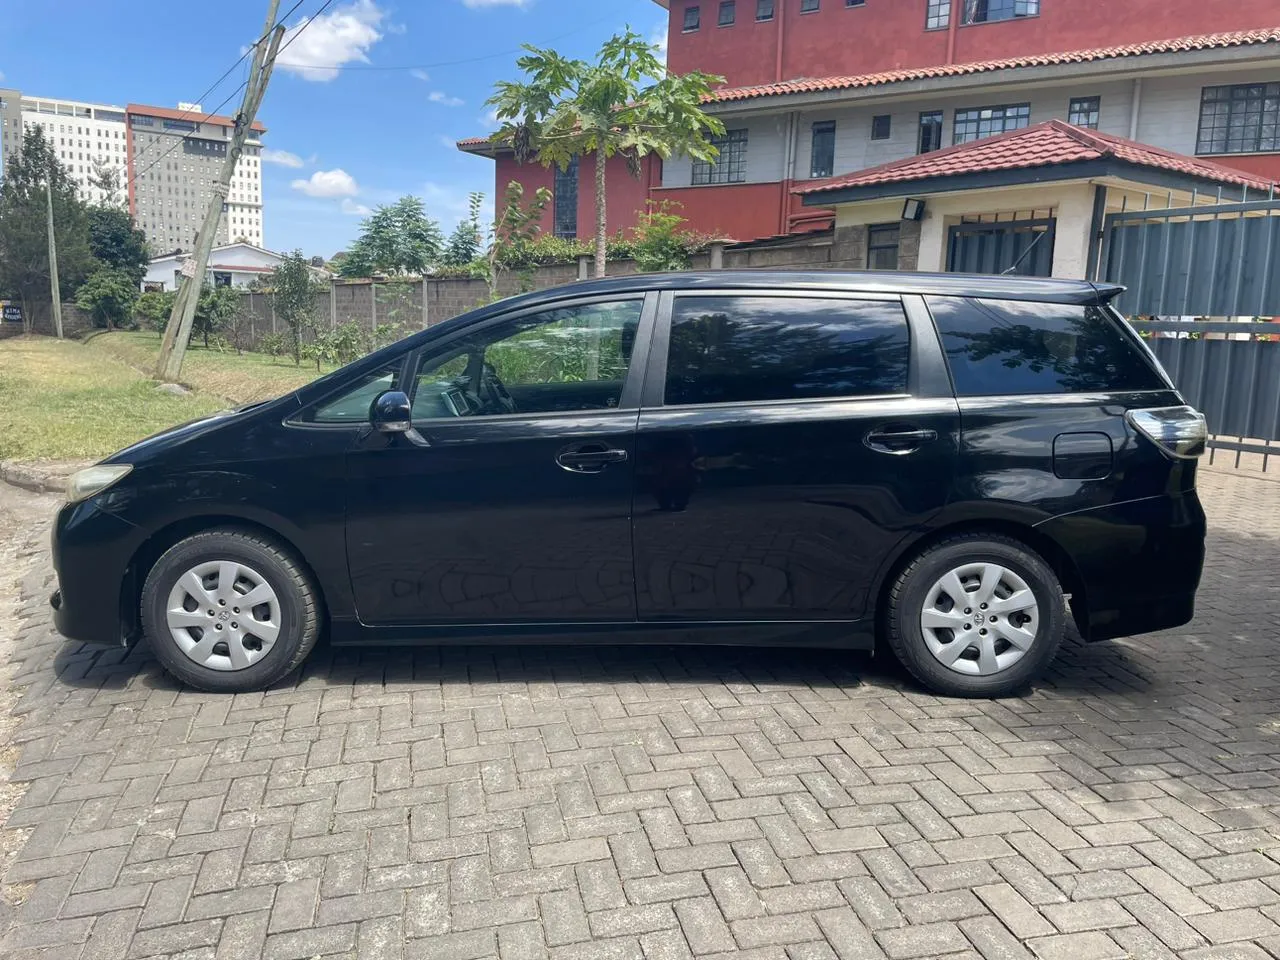 Toyota WISH for sale in Kenya You Pay 30% Deposit Trade in OK EXCLUSIVE